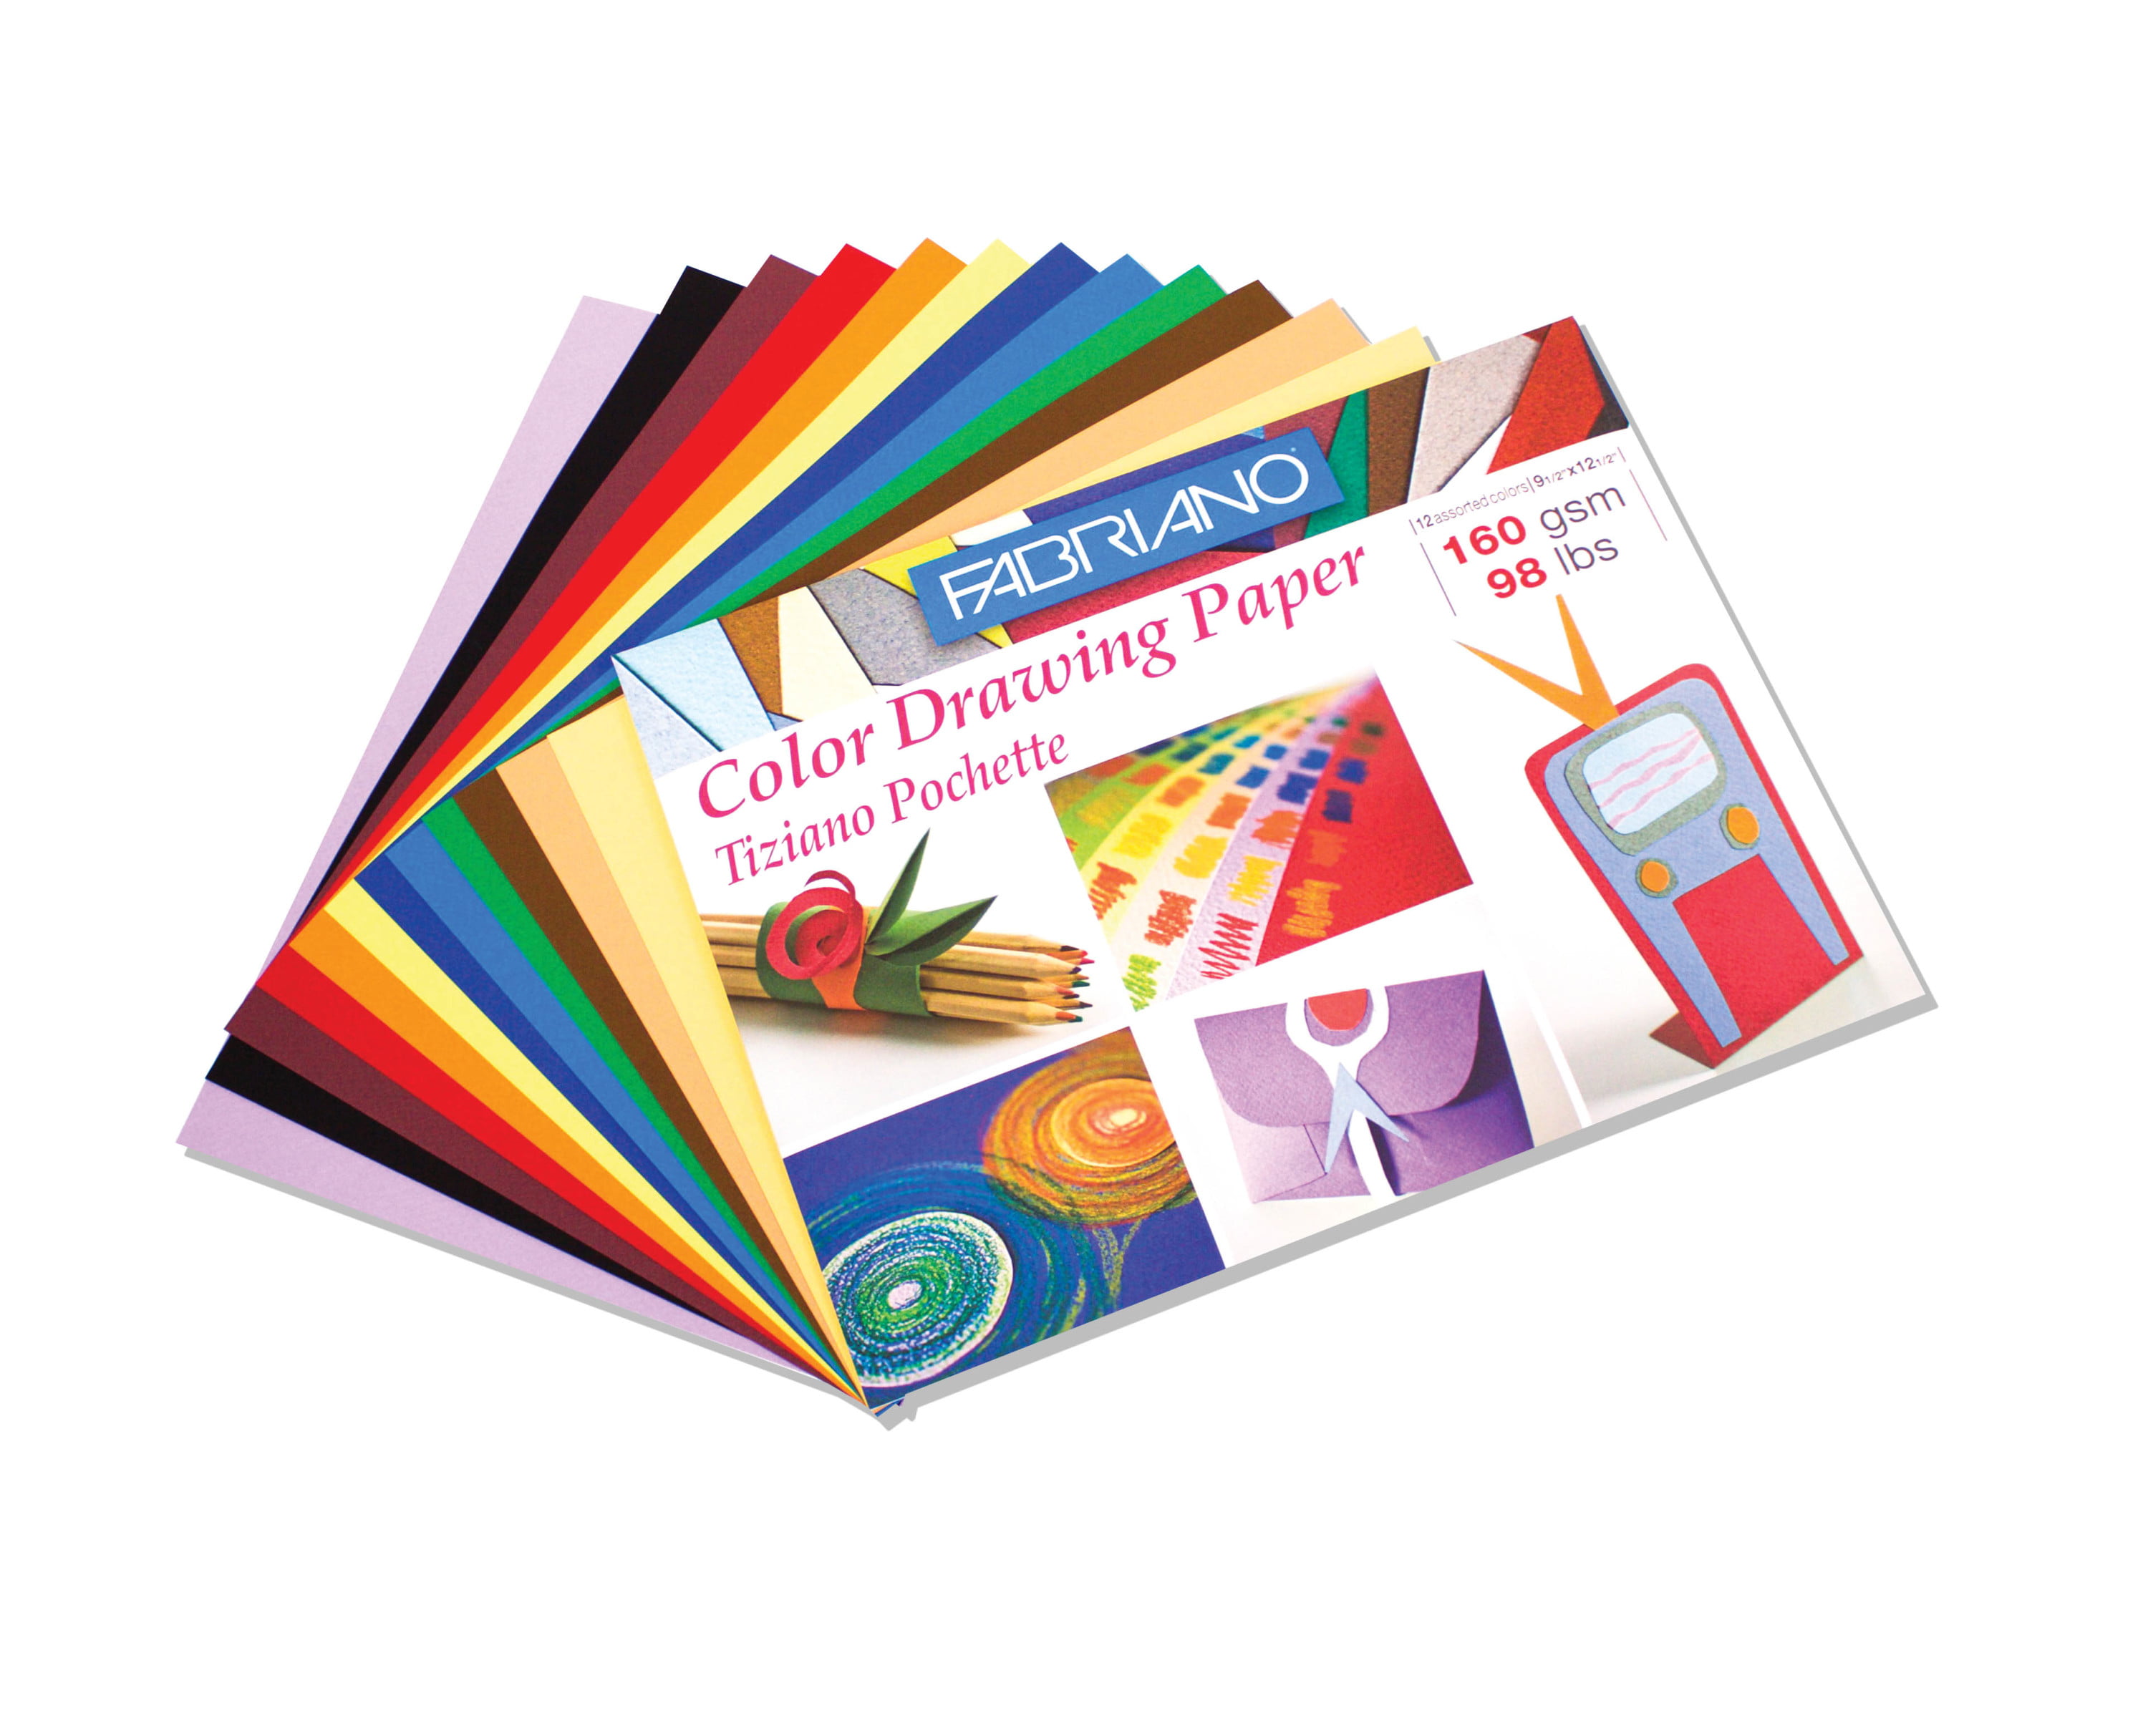 Fabriano 200 gsm 9x12 watercolor paper, Hobbies & Toys